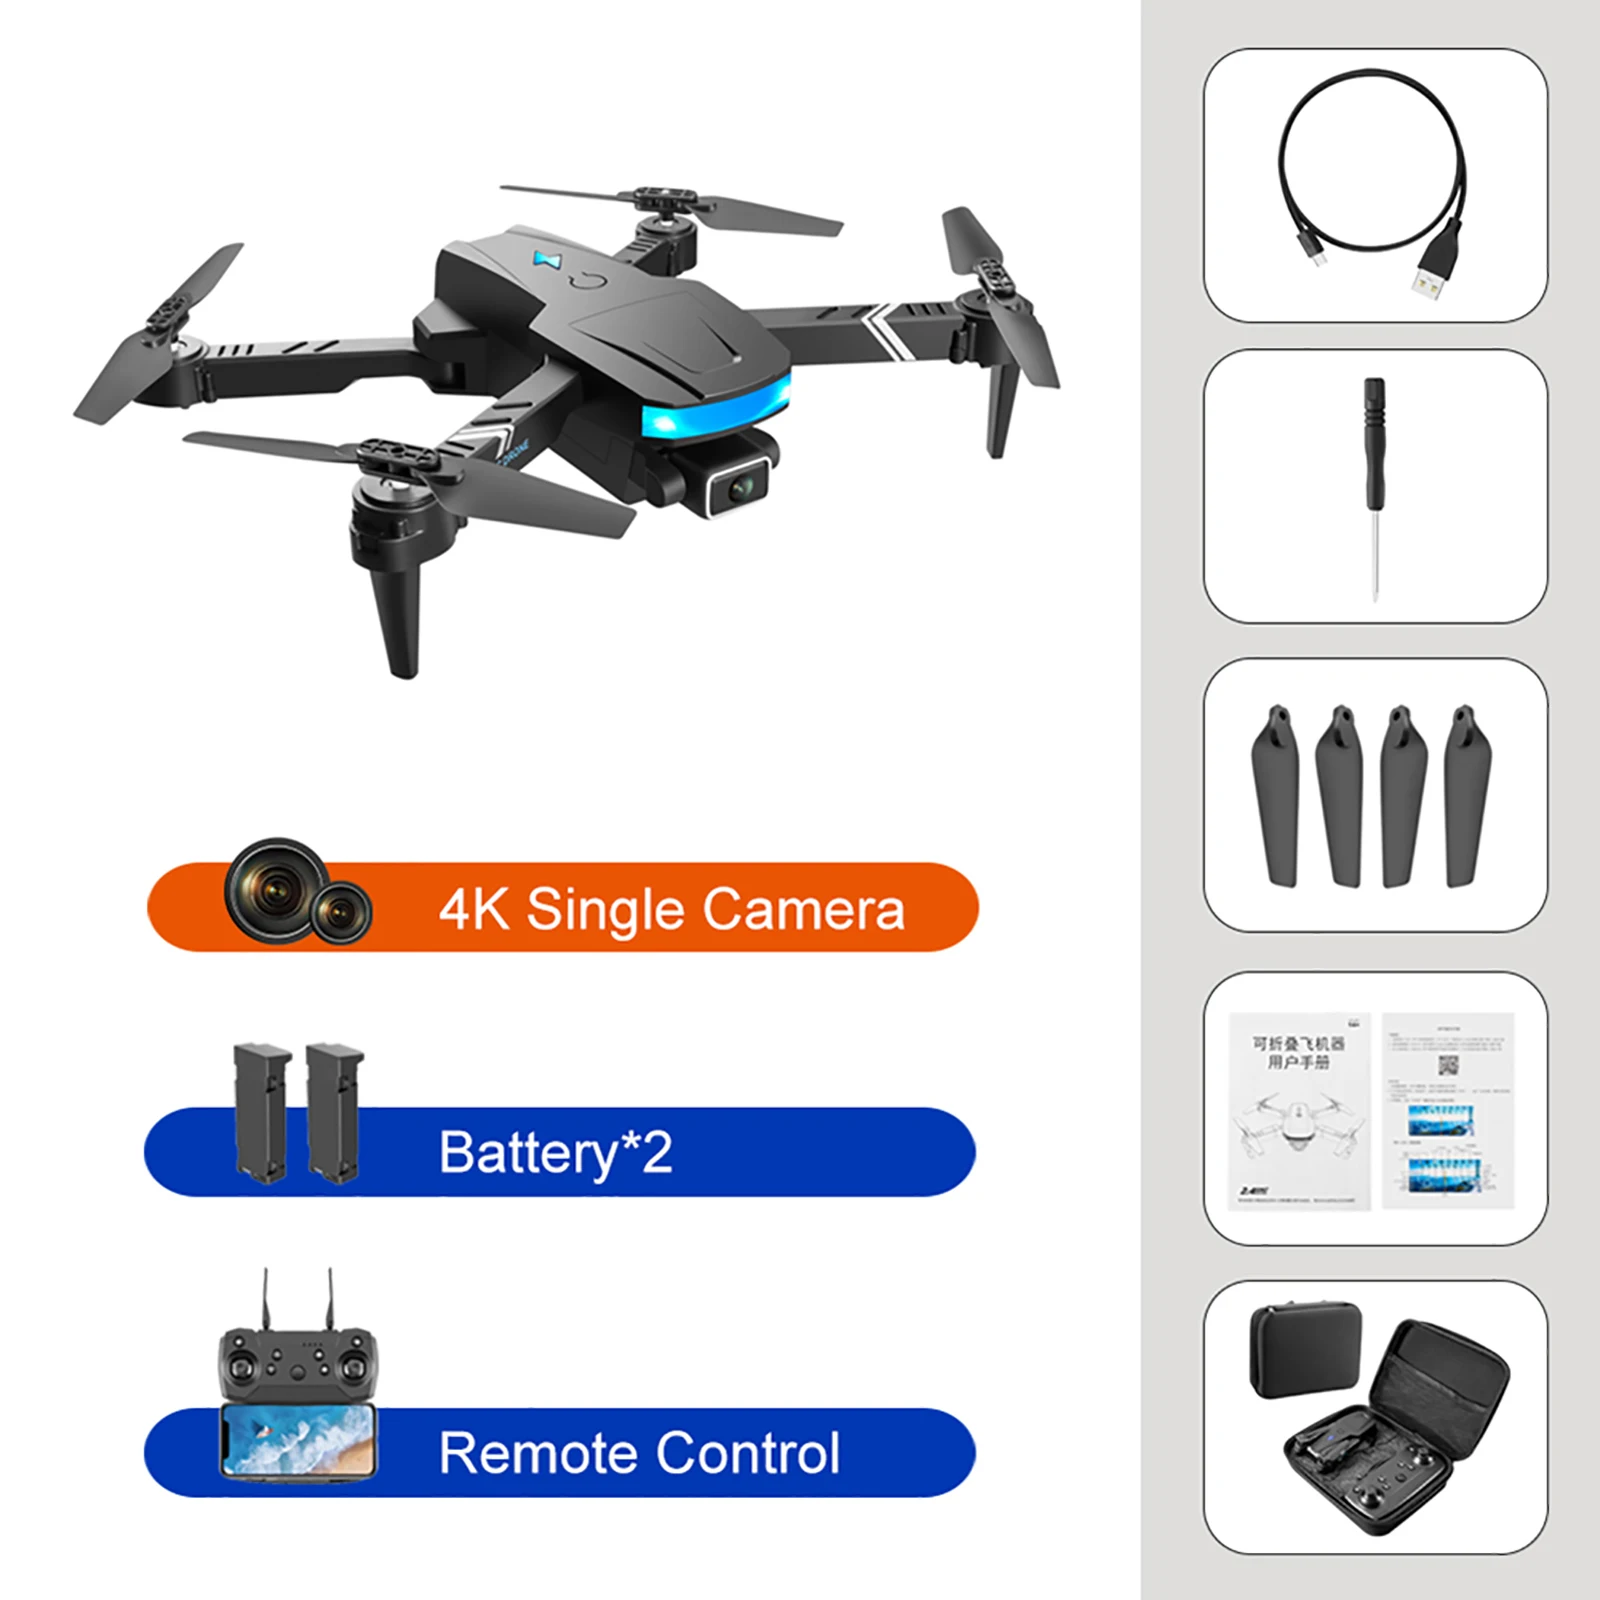 LS/RC-878 RC Drone 4K Single / Dual HD Camera Aerial Photography Altitude Hold Foldable Remote Control Quadcopter Aircraft Toys RC Quadcopter RC Quadcopter